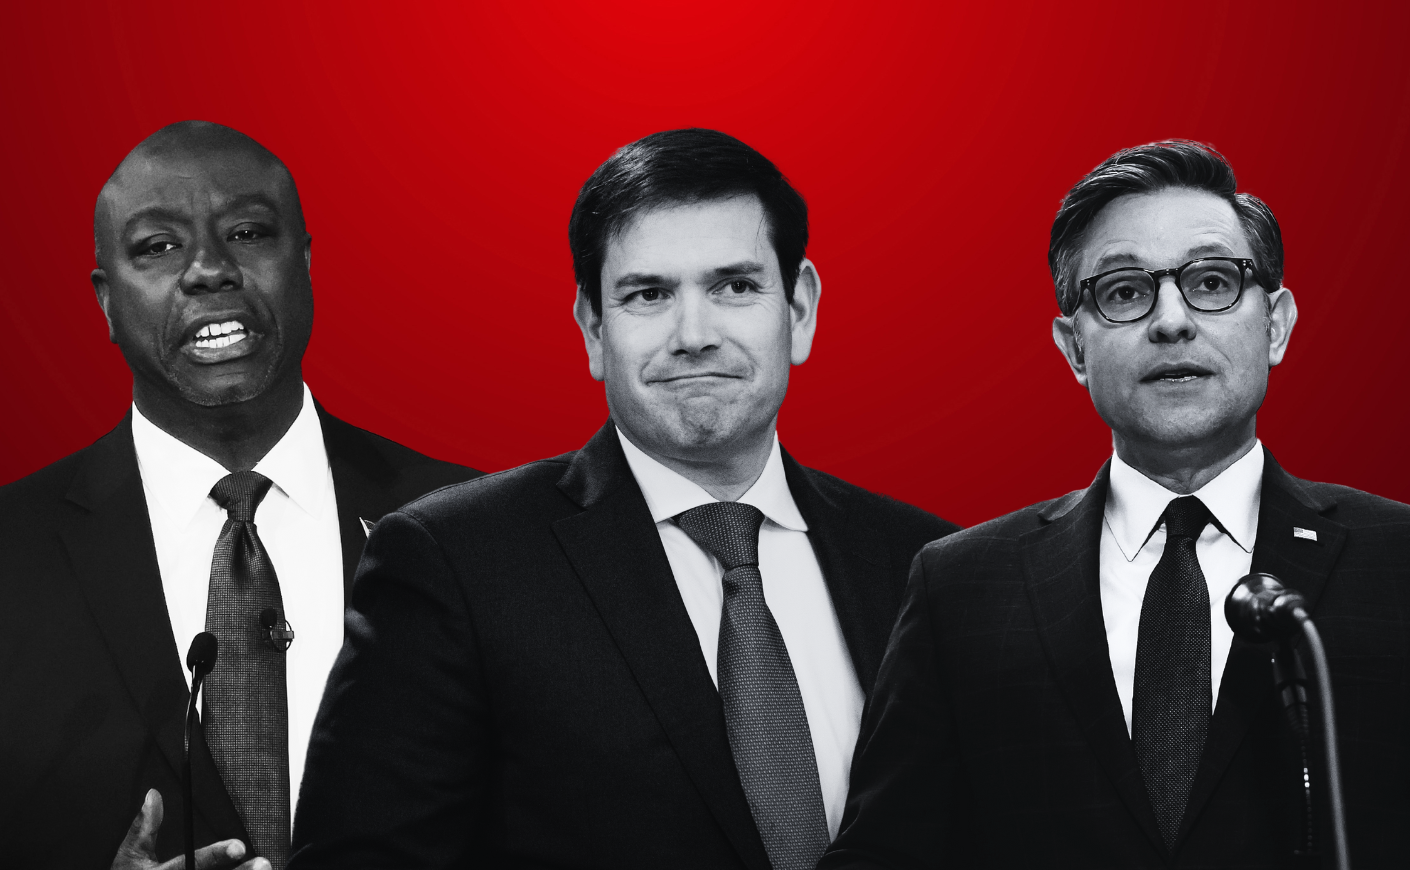 tim scott, marco rubio and mike johnson on a red background